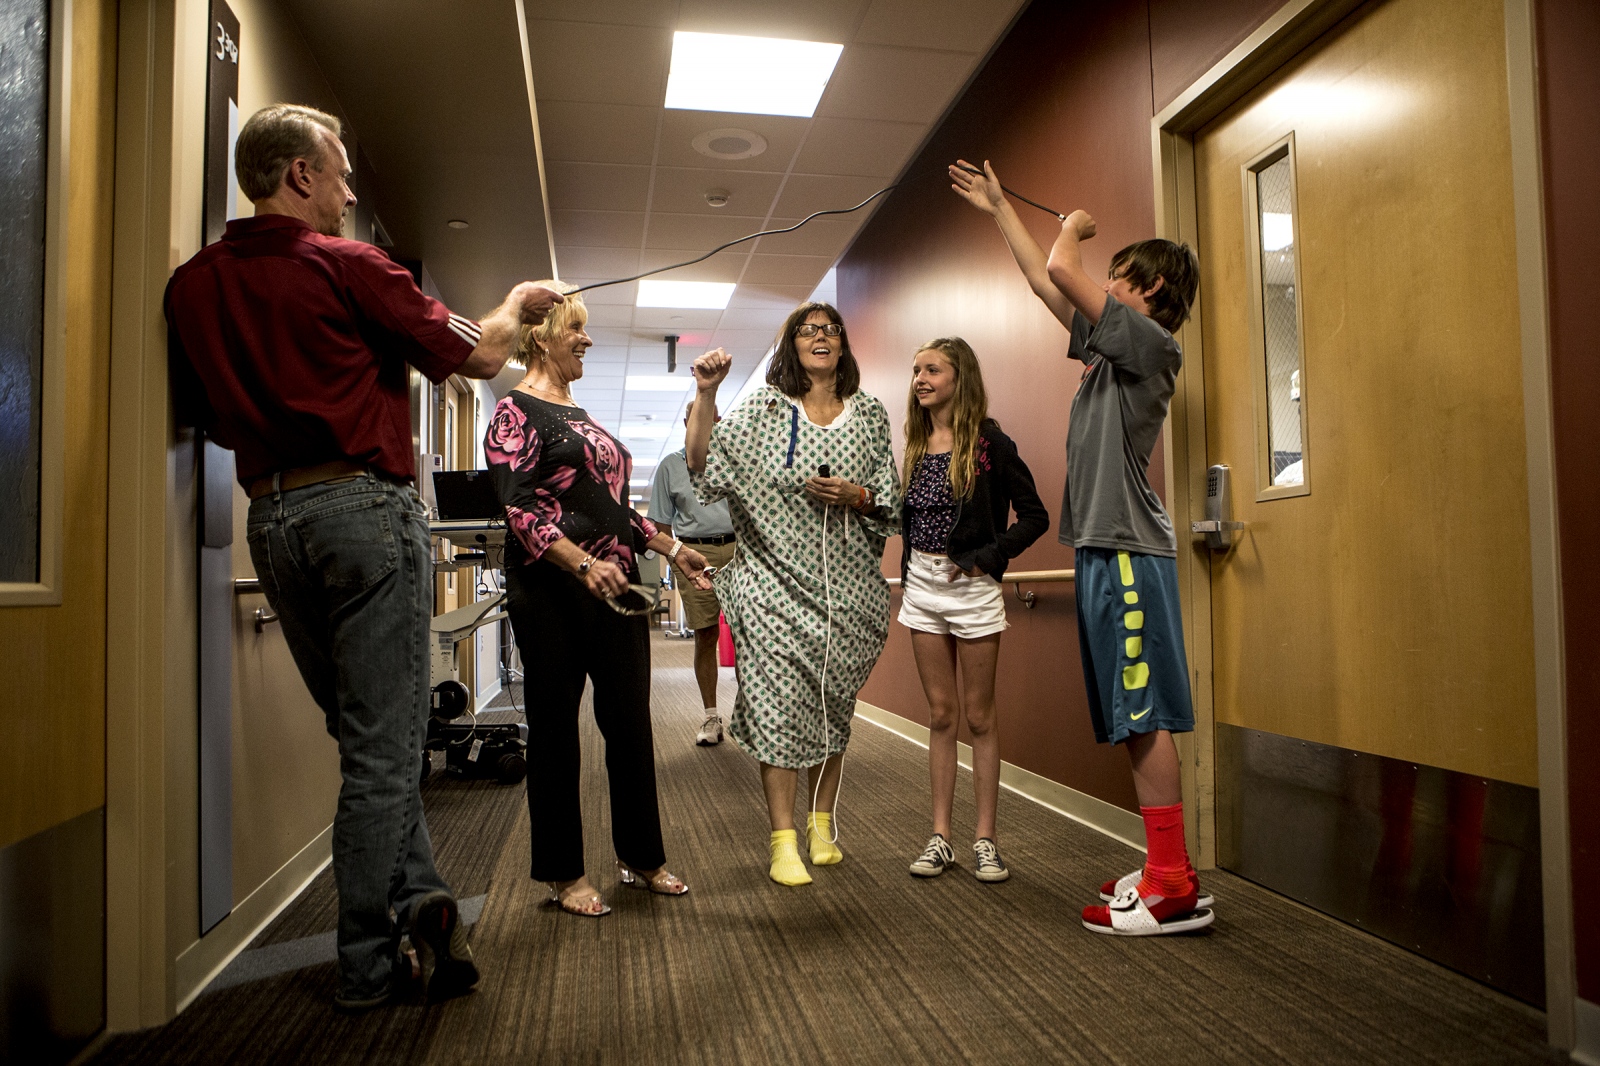 Facing Cancer Head On - Stacey took her second walk through the hospital hallways...